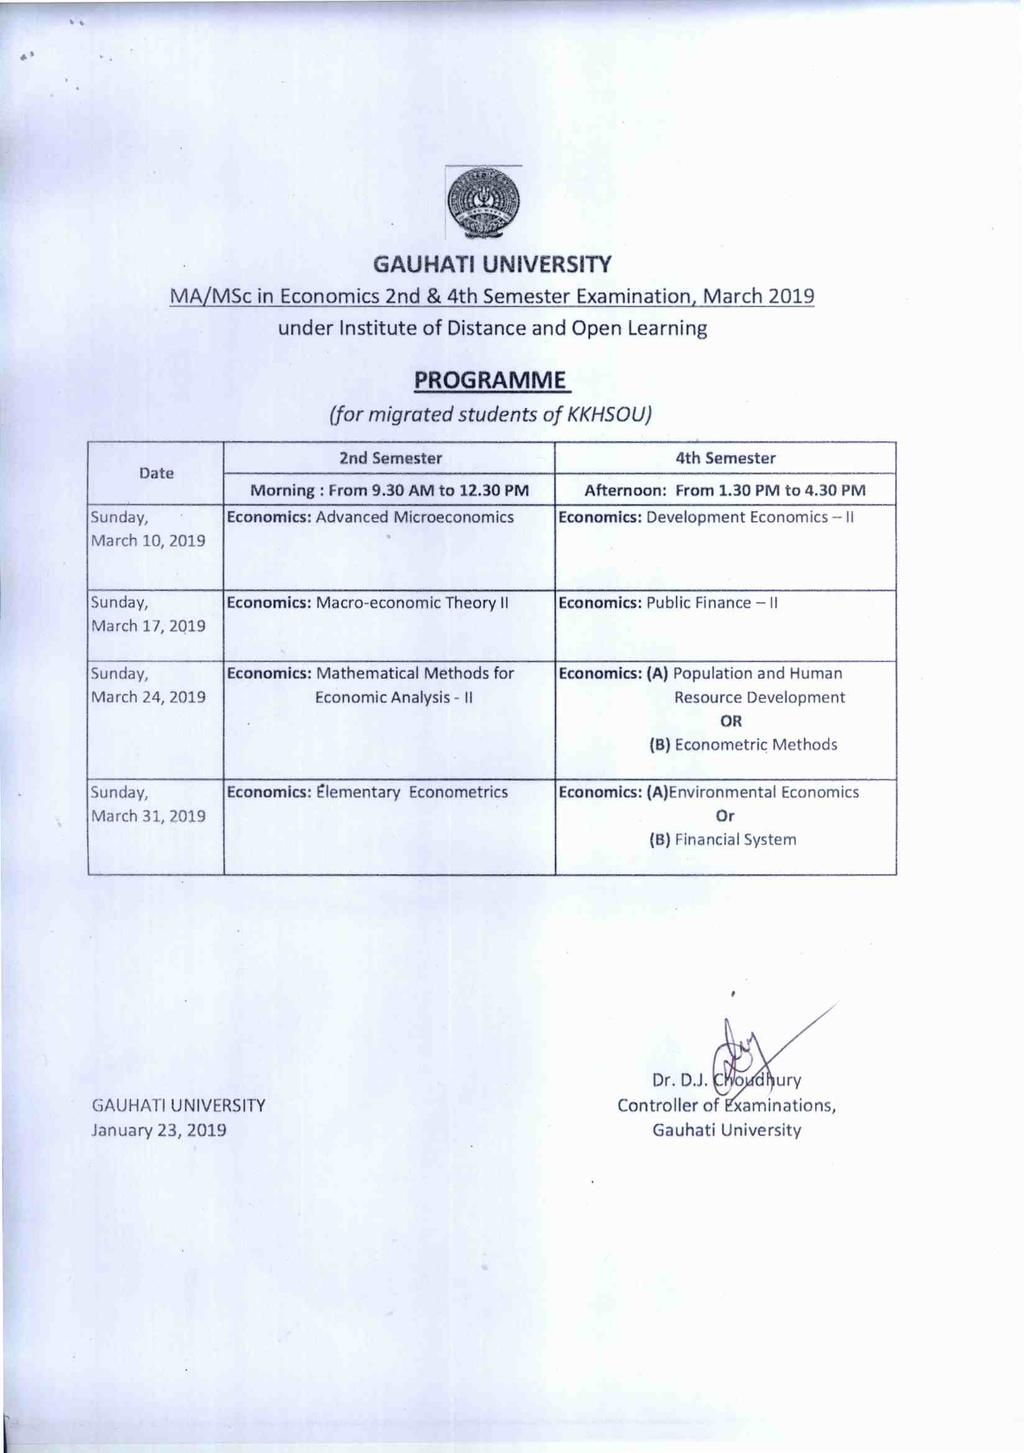 MA/MSc in Economics 2nd & 4th Semester Examination, (for migrated students of KKHSOU) 10, 2nd Semester Economics: Advanced Microeconomics 4th Semester Afternoon: From 1.30 PM to 4.